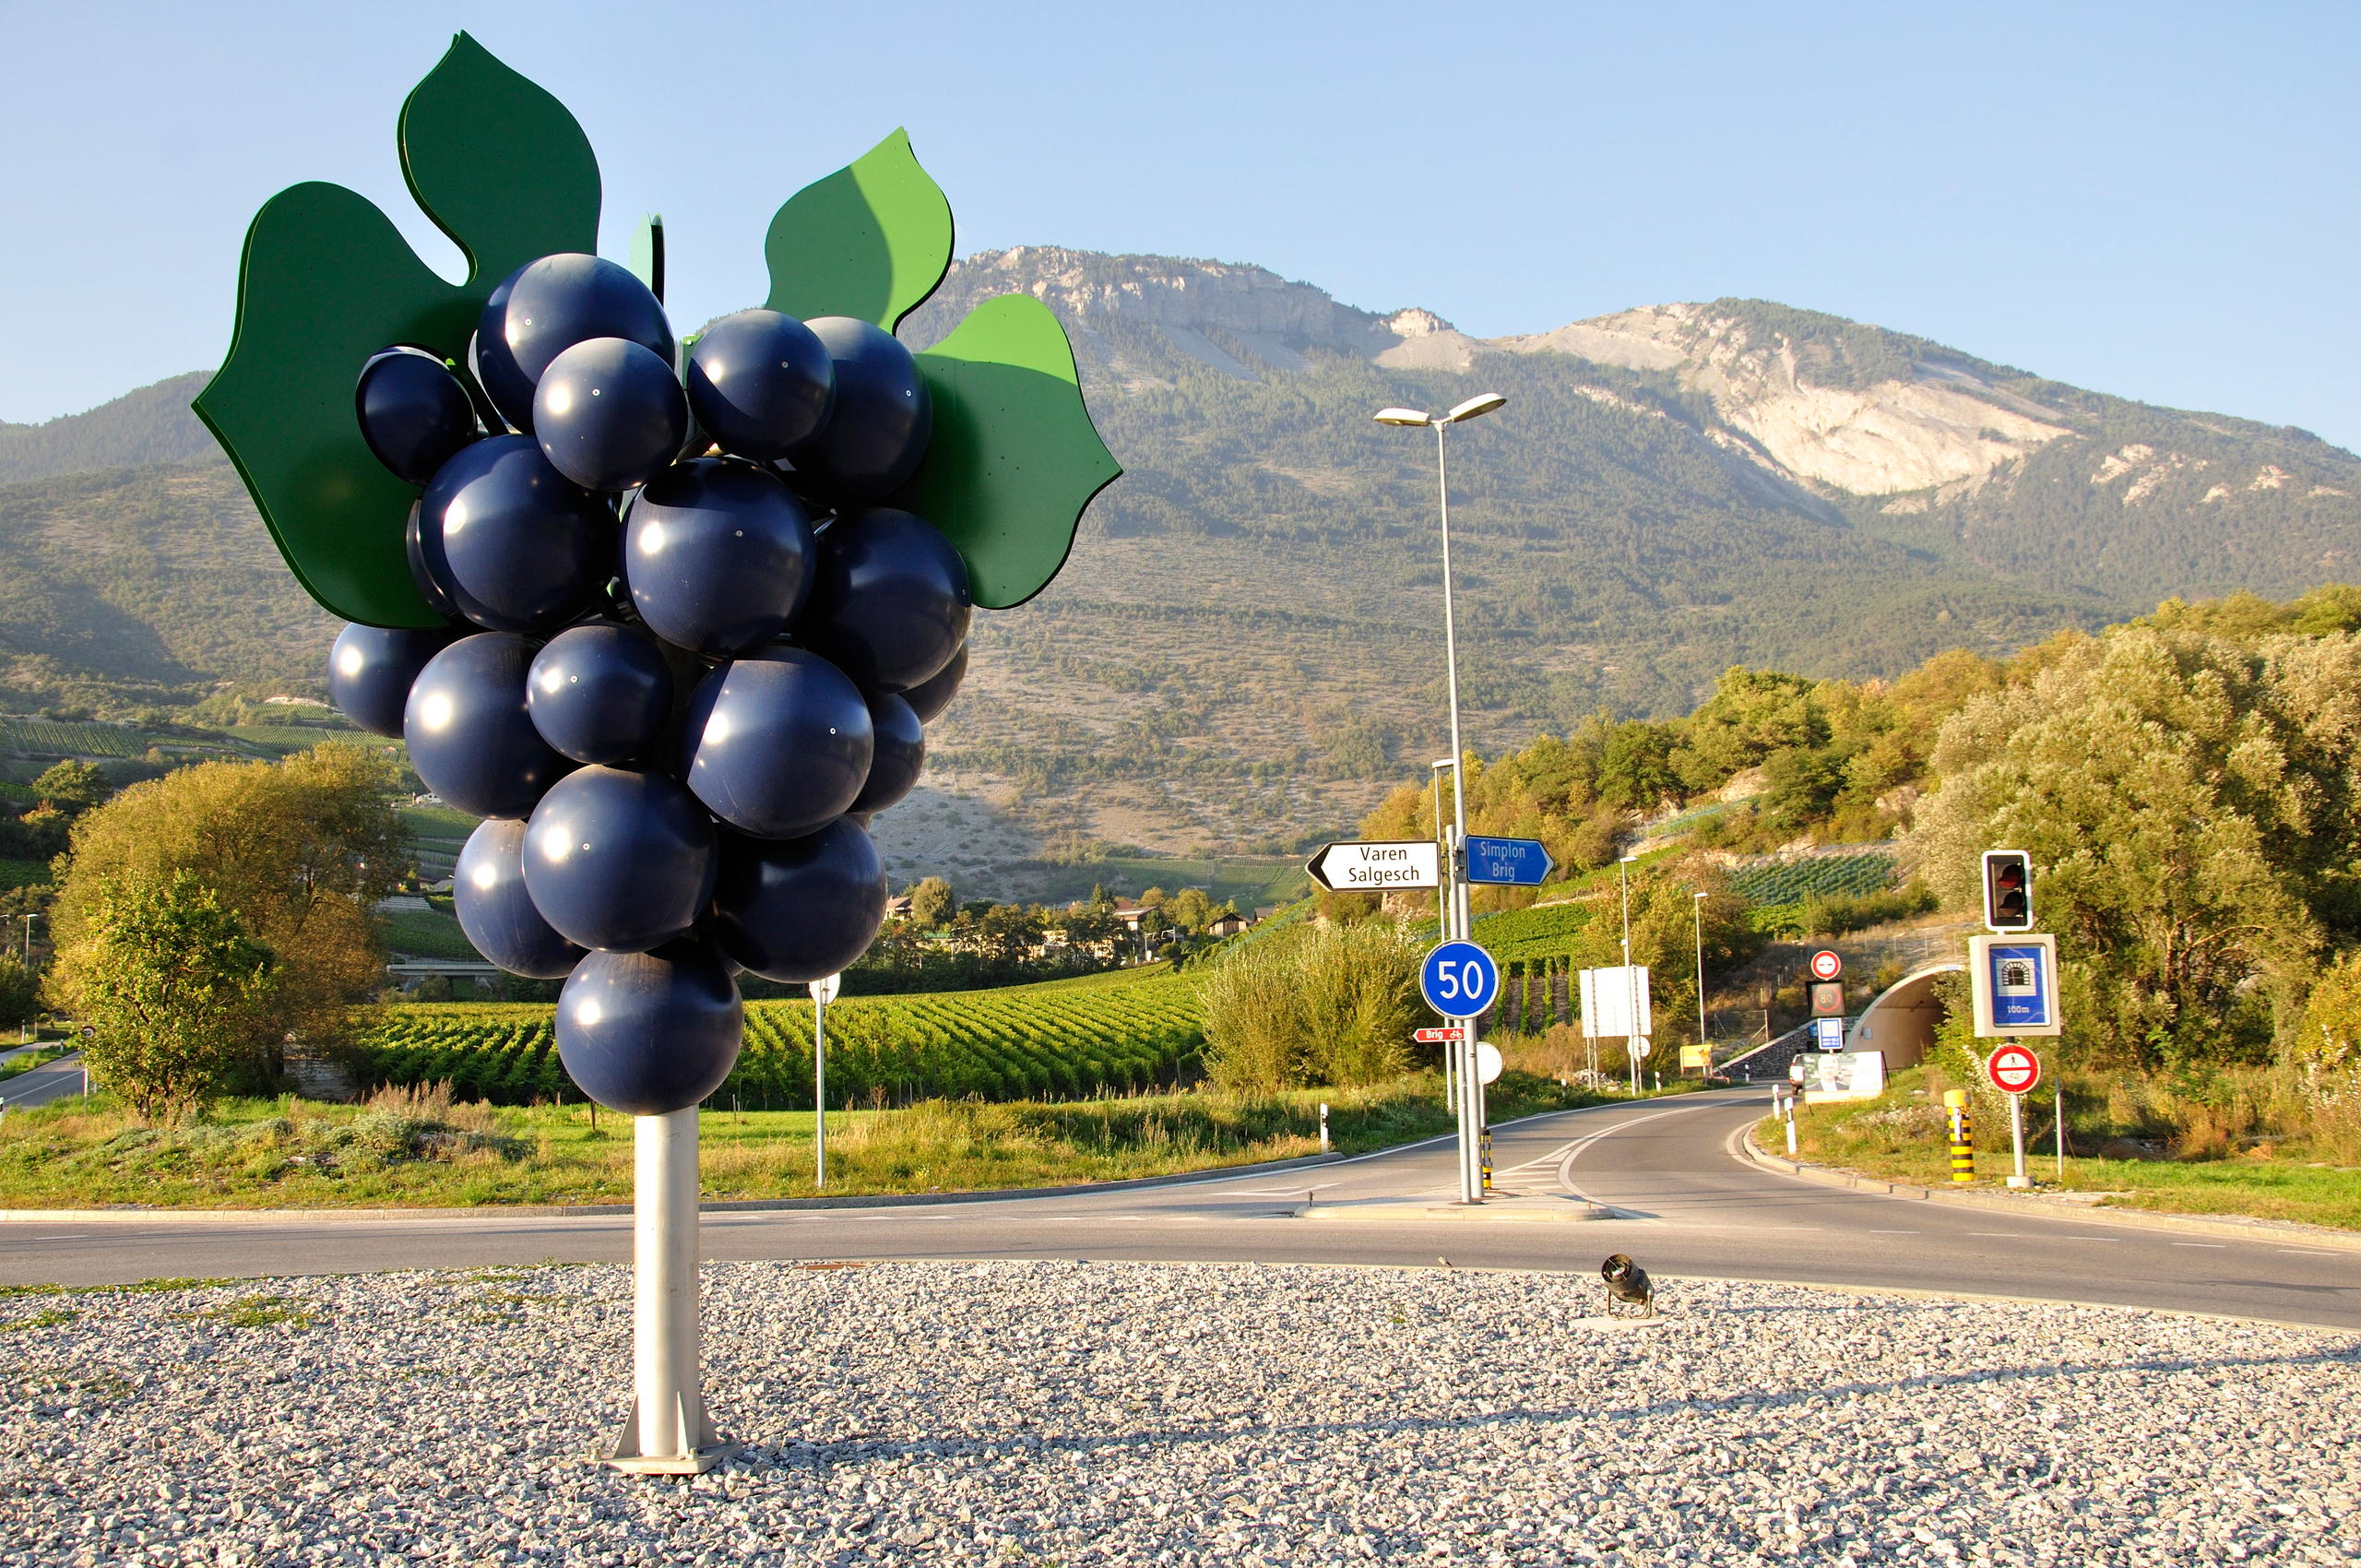 A sculpture of a bunch of grapes on a graveled roundabout